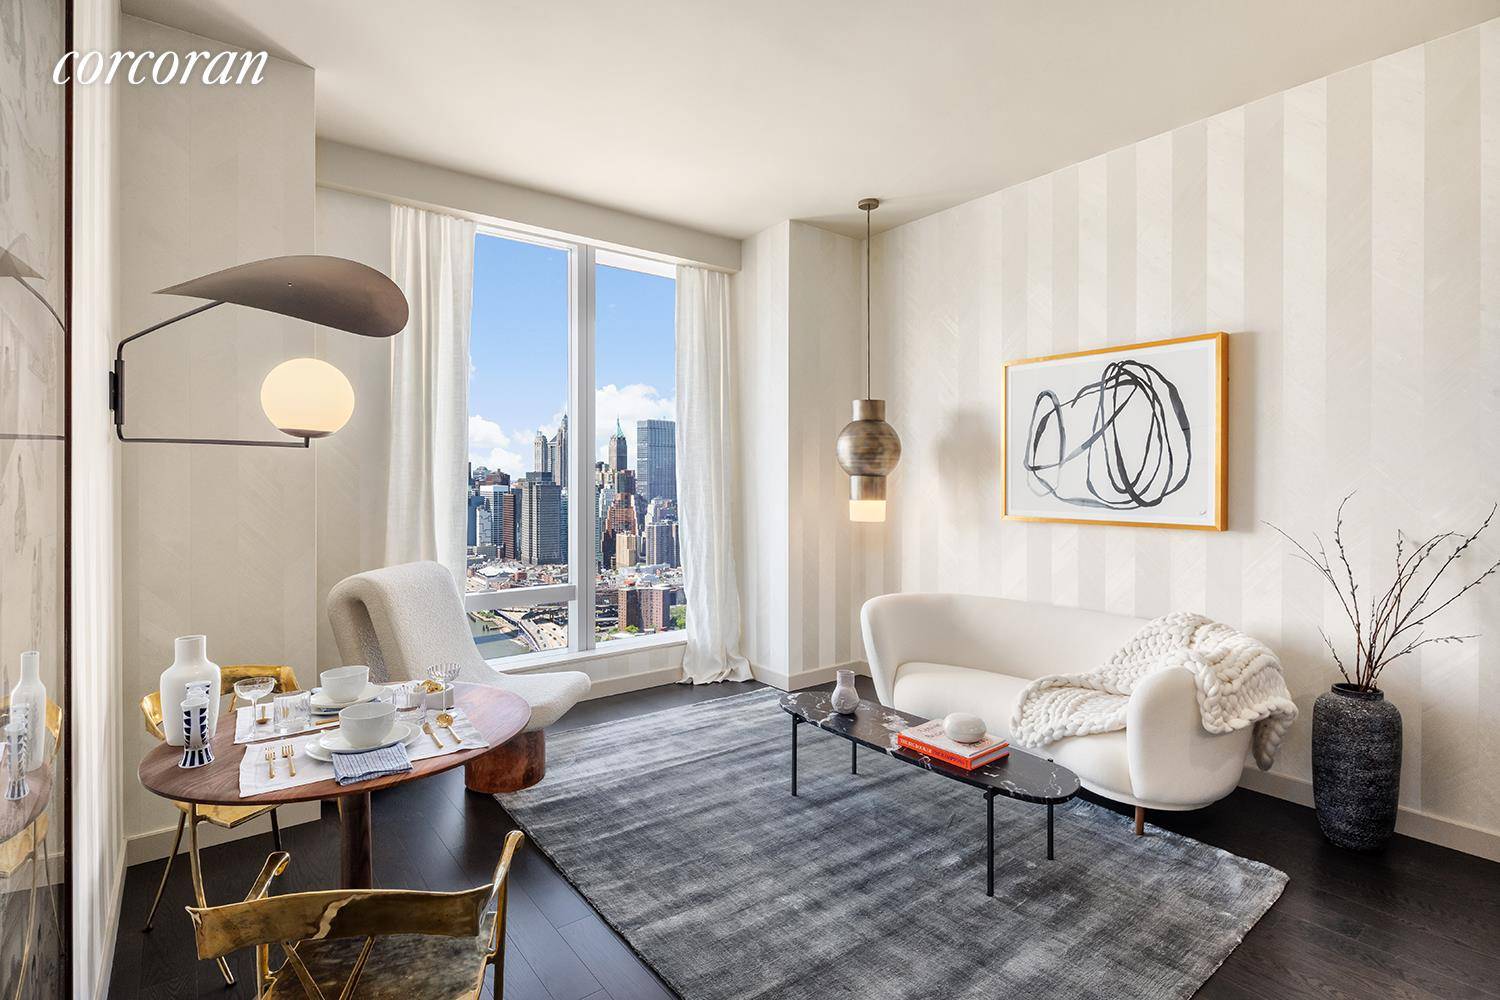 ONE MANHATTAN SQUARE OFFERS ONE OF THE LAST 20 YEAR TAX ABATEMENTS AVAILABLE IN NEW YORK CITY Residence 64B is a 1, 034 square foot two bedroom, two bathroom with ...